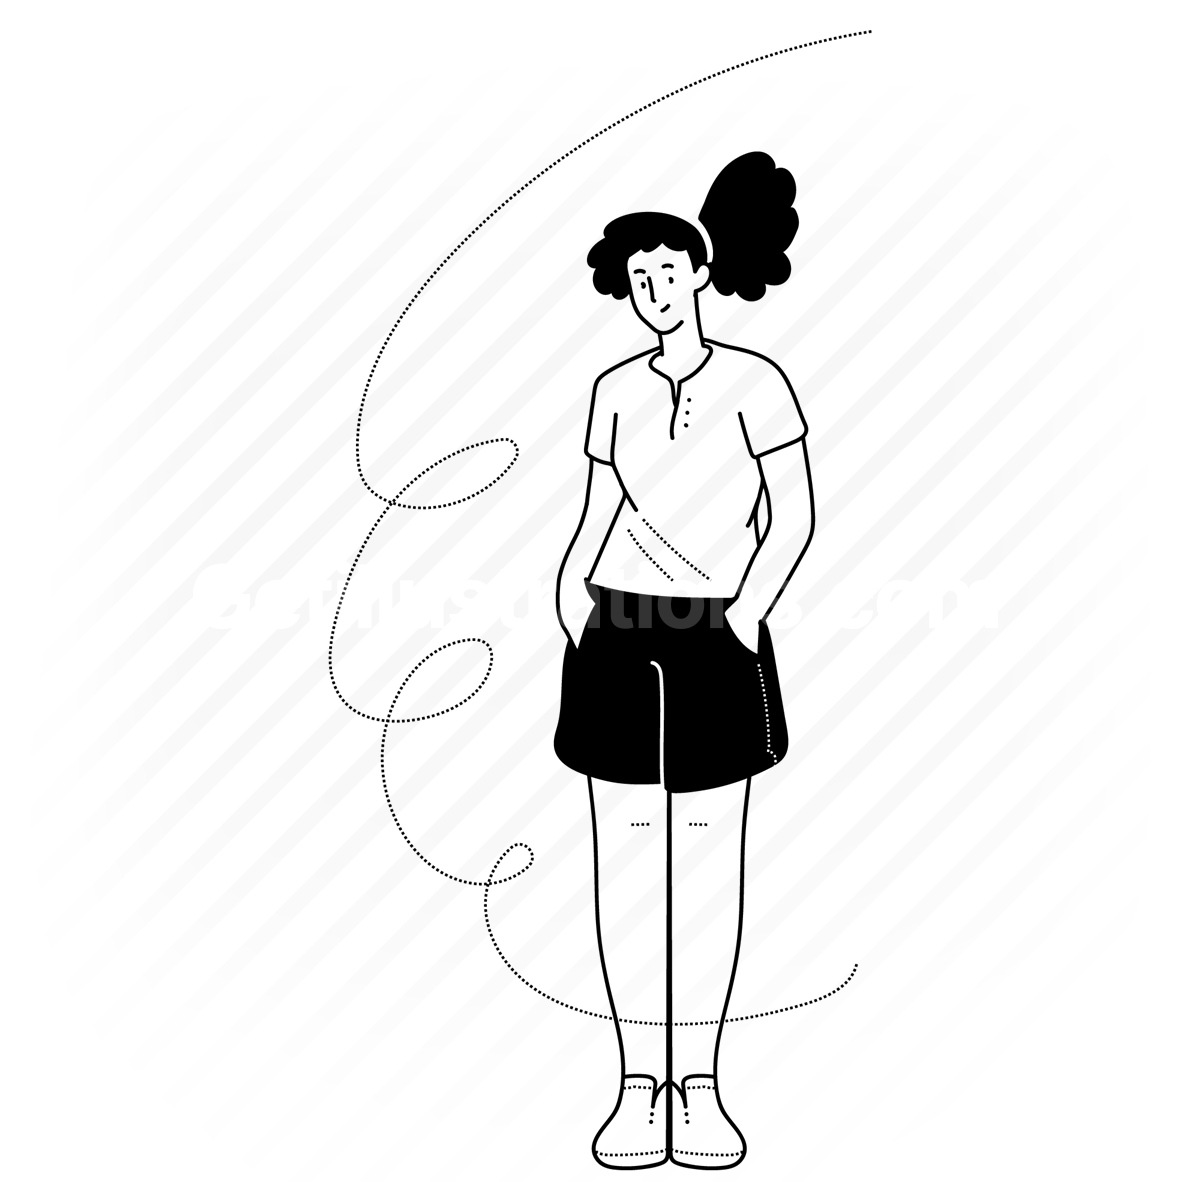 movement, pose, people, person, user, avatar, woman, stand, skirt, shorts